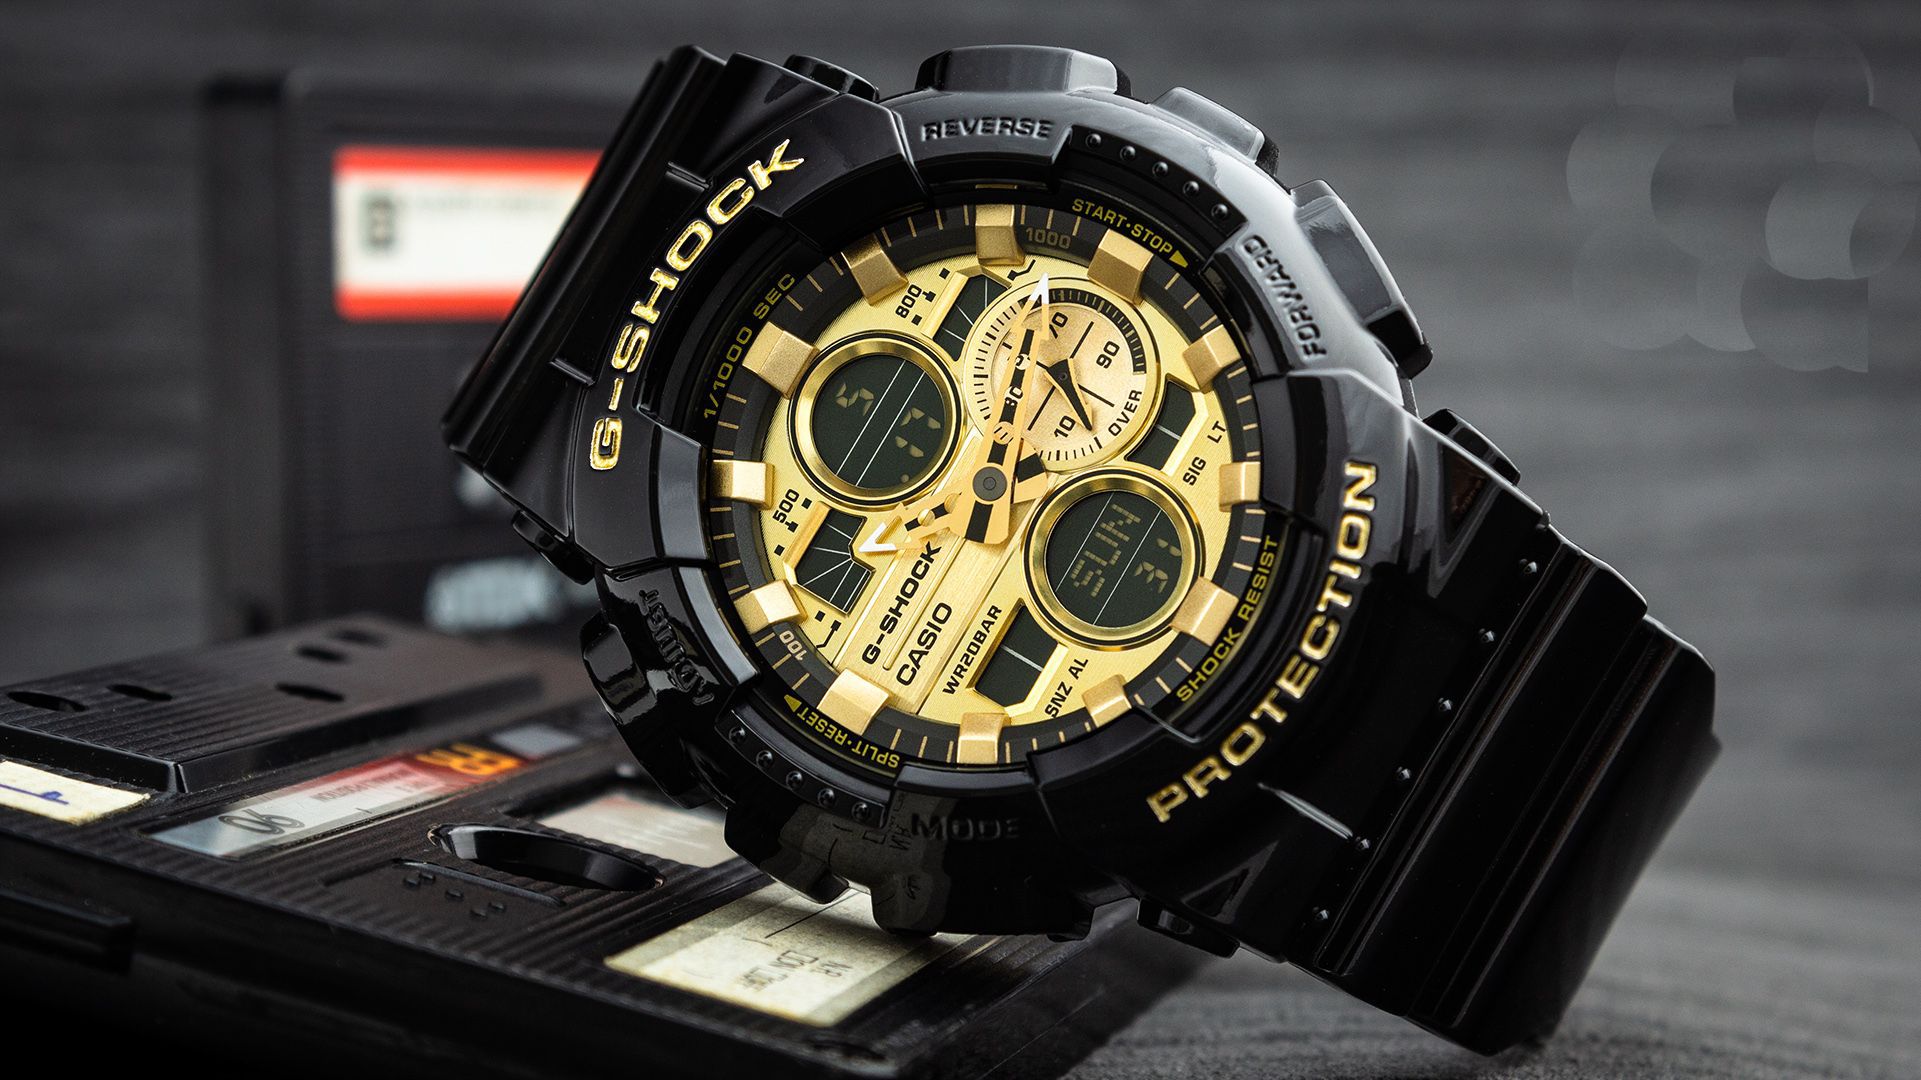 This Casio G-shock Analogue-Digital Watch for Men is the perfect timepiece to wear or to gift. It's Black 50 mm Round case combined with the comfortable Black Plastic will ensure you enjoy this stunning timepiece without any compromise. Operated by a high quality Quartz movement and water resistant to 20 bars, your watch will keep ticking. This sporty and trendy watch is a perfect gift for New Year, birthday,valentine's day and so on  -The watch has a calendar function: Day-Date, Stop Watch, Worldtime, Timer, Alarm, Alarm High quality 21 cm length, 28 mm wide, Black Plastic strap with a Buckle Case Diameter: 50 mm, Case height: 16 mm and Case color: Black Dial color: Gold